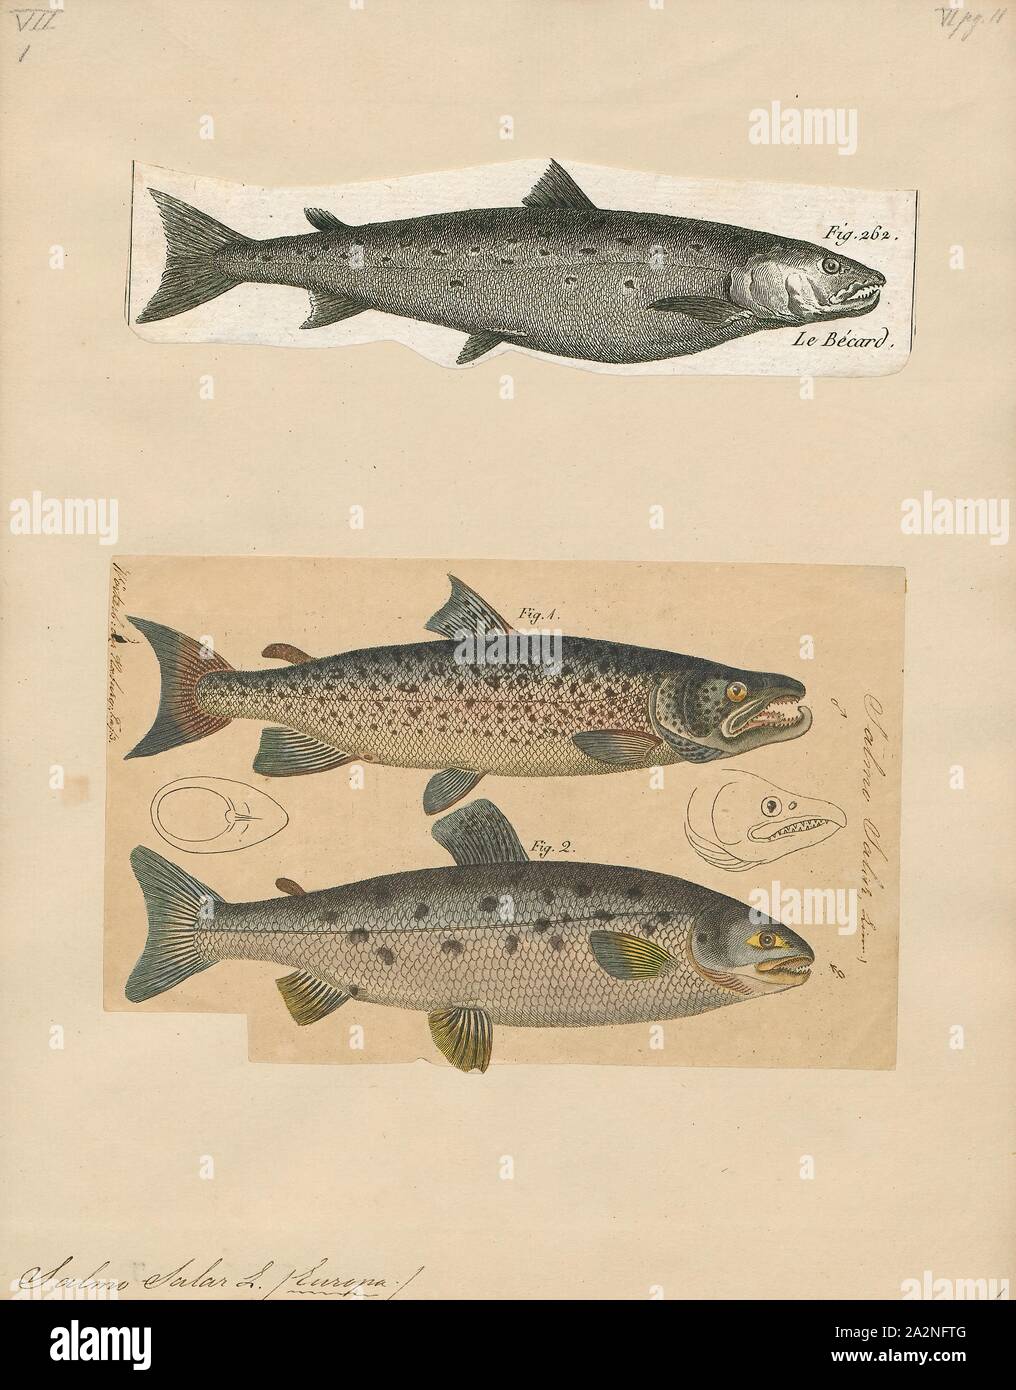 Salmo salar, Print, The Atlantic salmon (Salmo salar) is a species of ray-finned fish in the family Salmonidae. It is found in the northern Atlantic Ocean, in rivers that flow into the north Atlantic and, due to human introduction, in the north Pacific Ocean. Atlantic salmon have long been the target of recreational and commercial fishing, and this, as well as habitat destruction, has reduced their numbers significantly; the species is the subject of conservation efforts in several countries., 1700-1880 Stock Photo